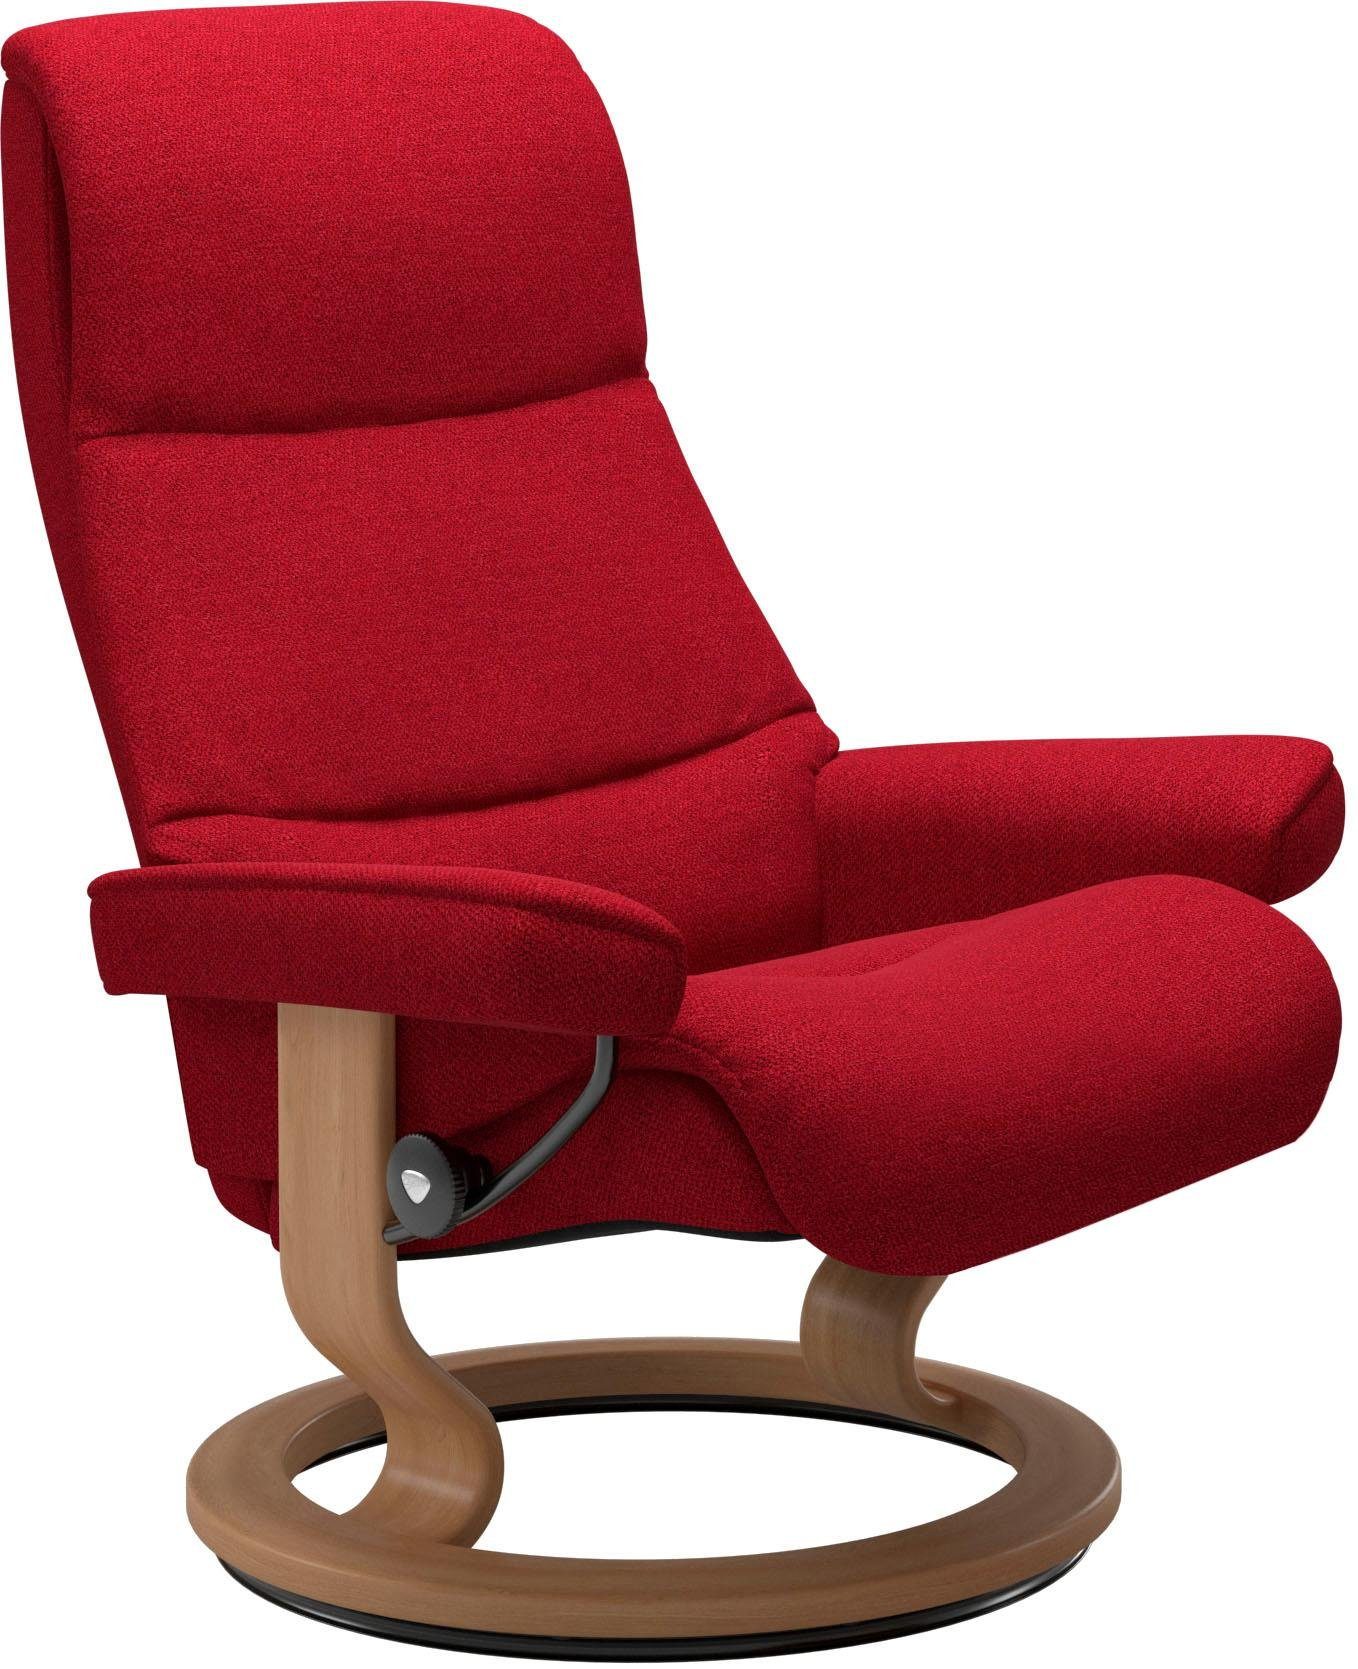 Stressless® Relaxsessel View, mit Classic Base, Größe M,Gestell Eiche | Funktionssessel